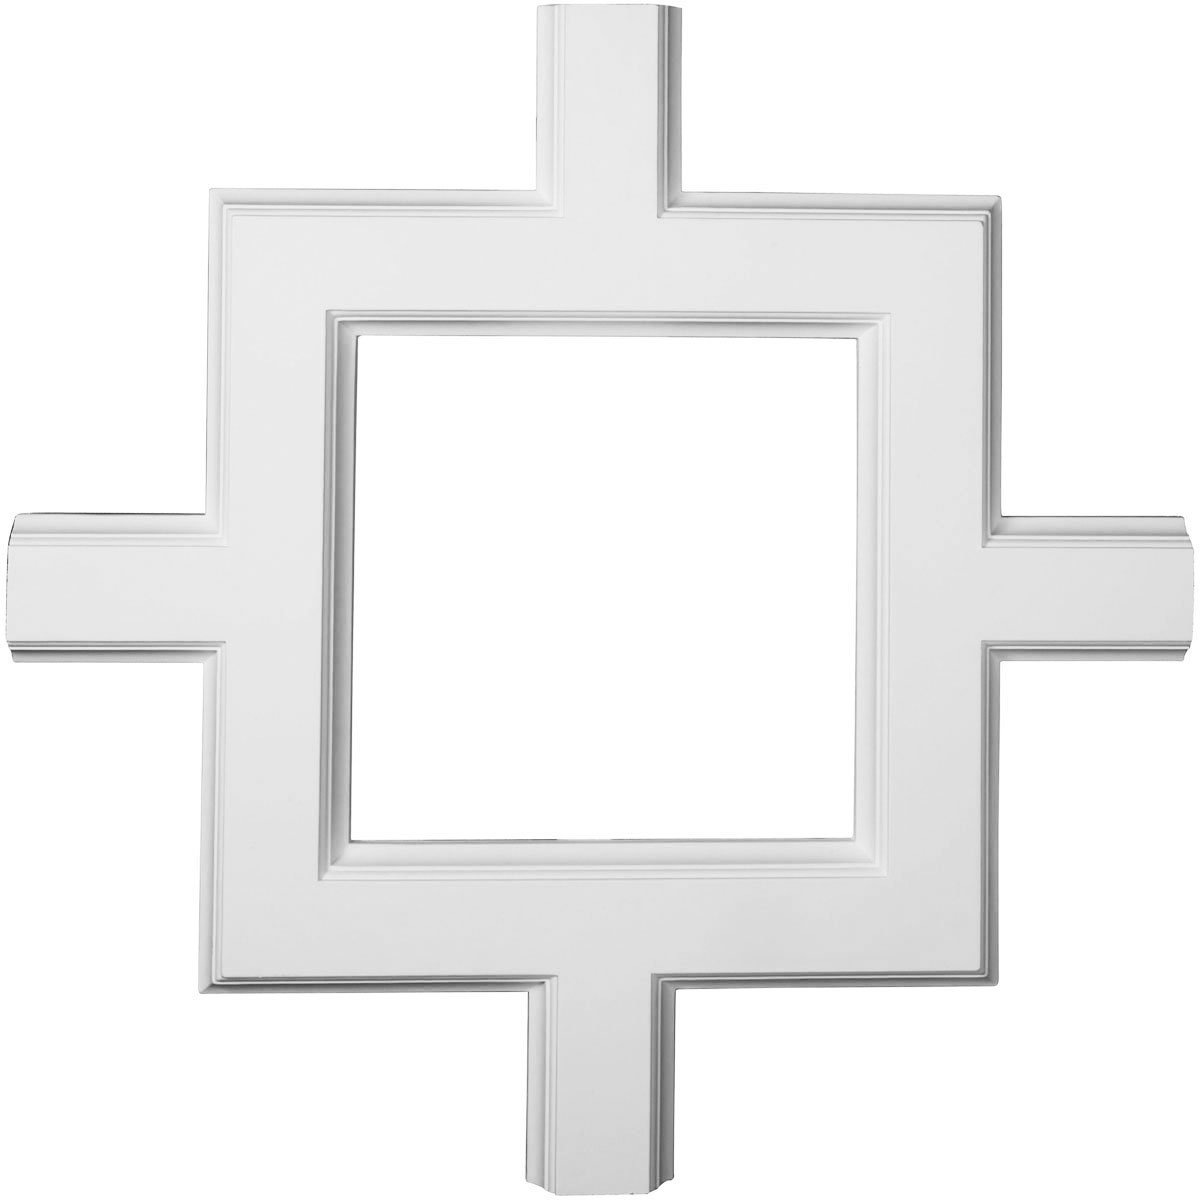 36 X 2 X 36 In. Inner Square Intersection For 5 Traditional Coffered Ceiling System